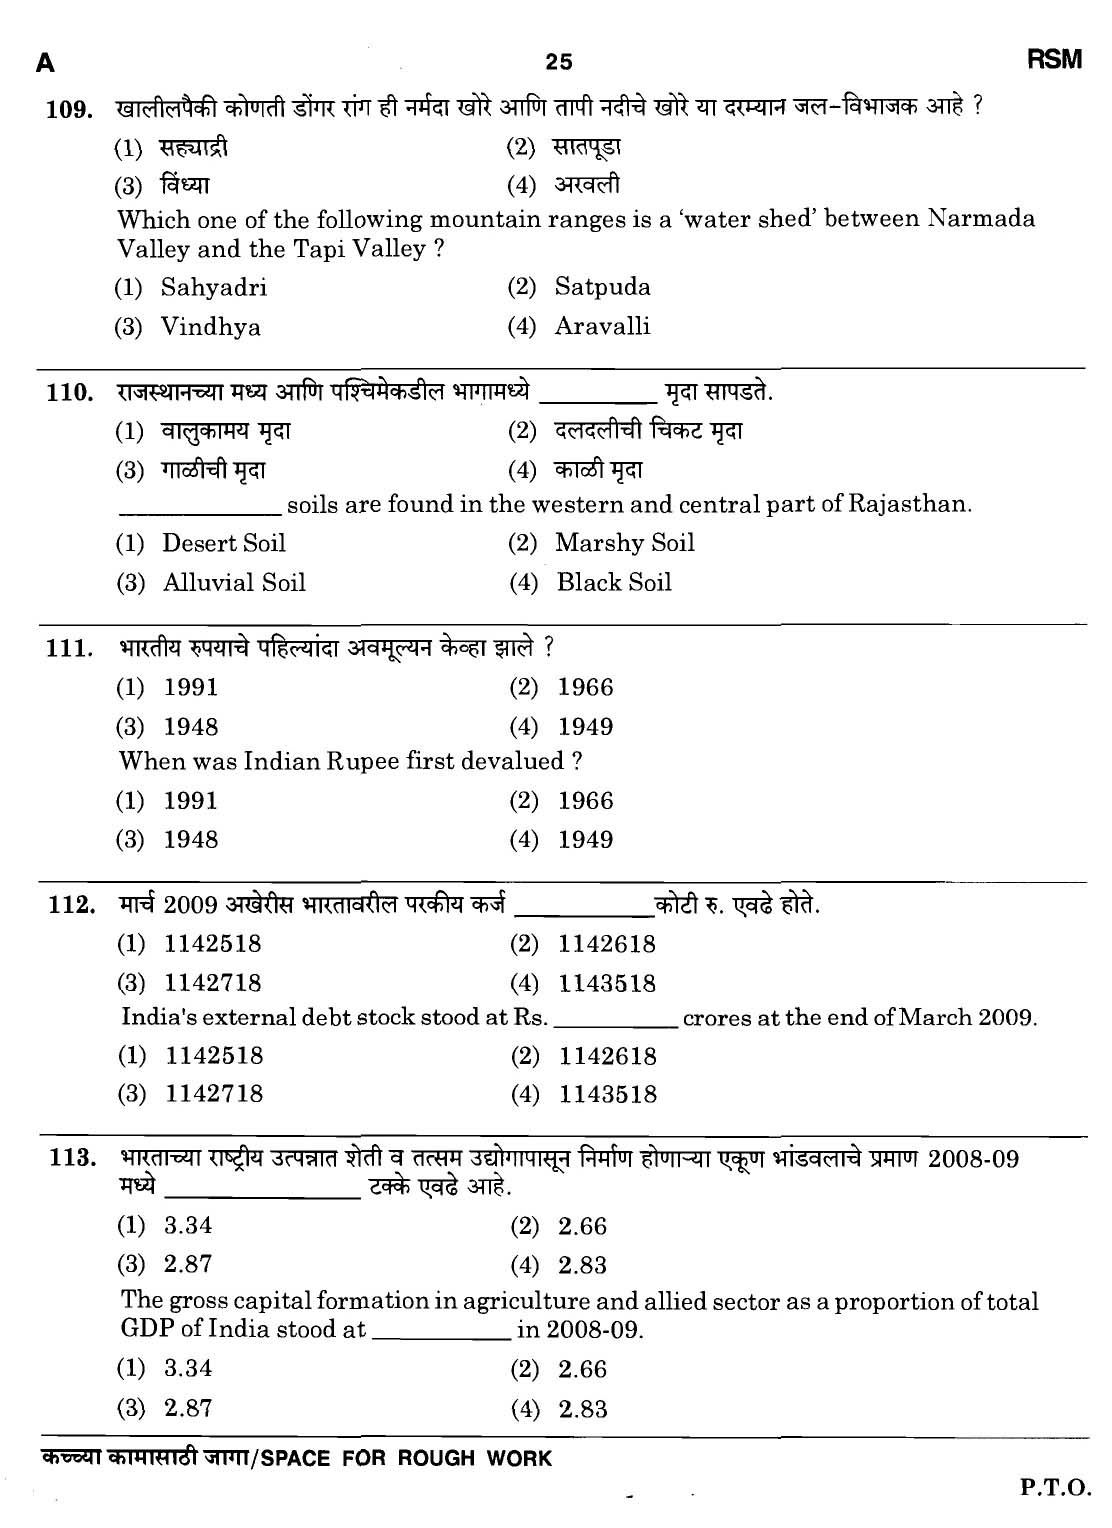 MPSC Agricultural Services Preliminary Exam 2011 Question Paper 24